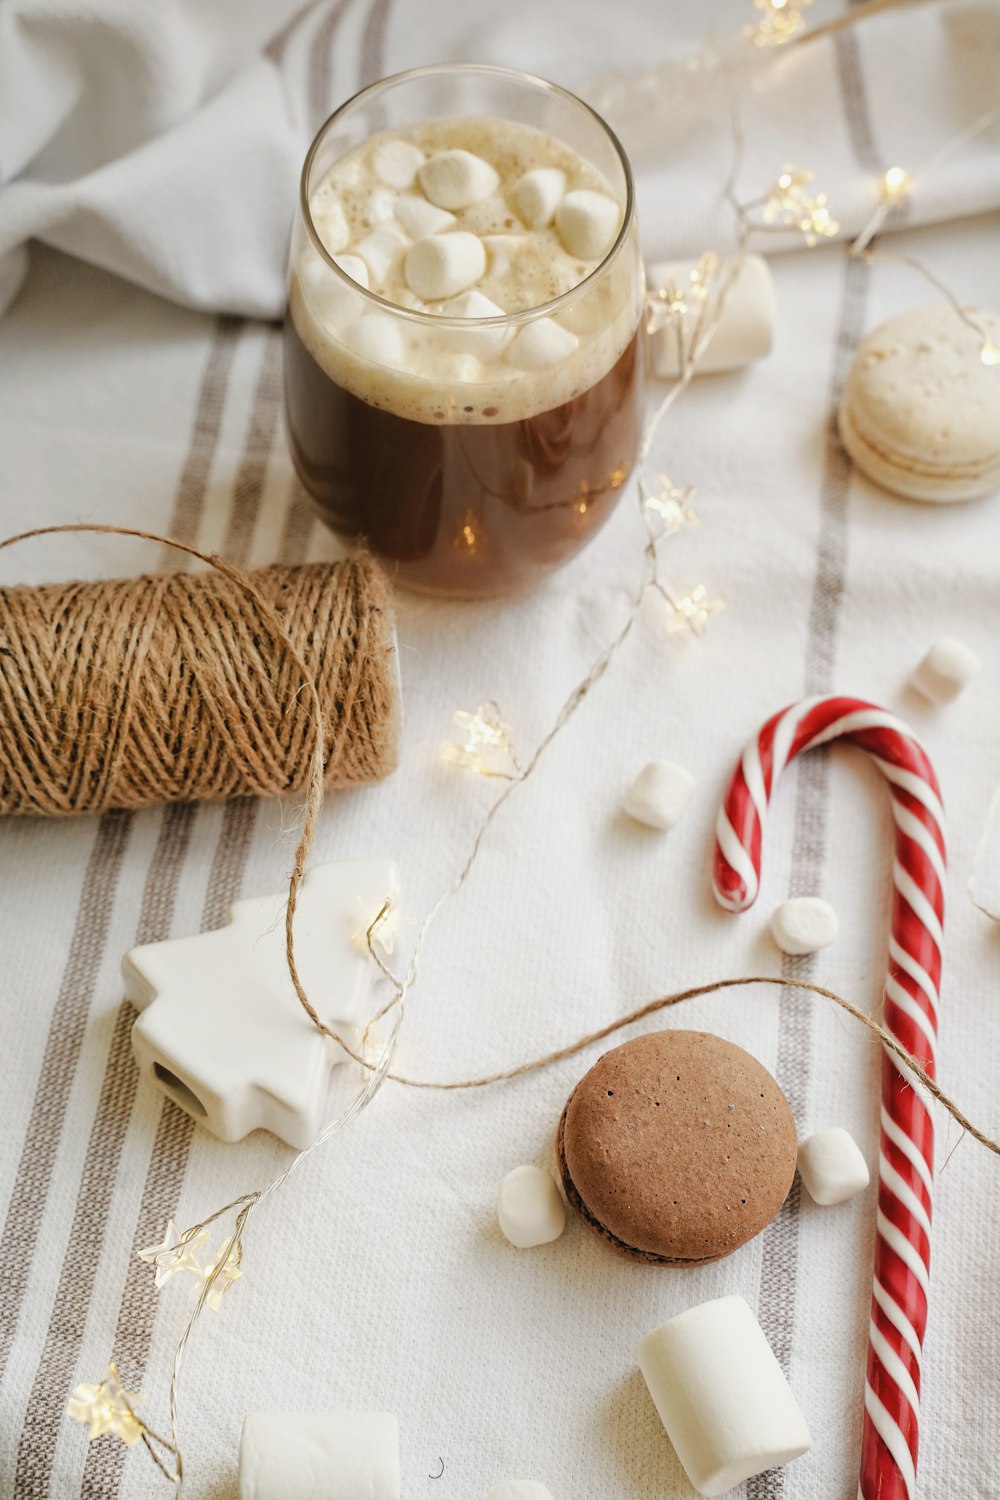 stringlights, drink with marshmallows on top, brown thread spool, macaroons, and candycane